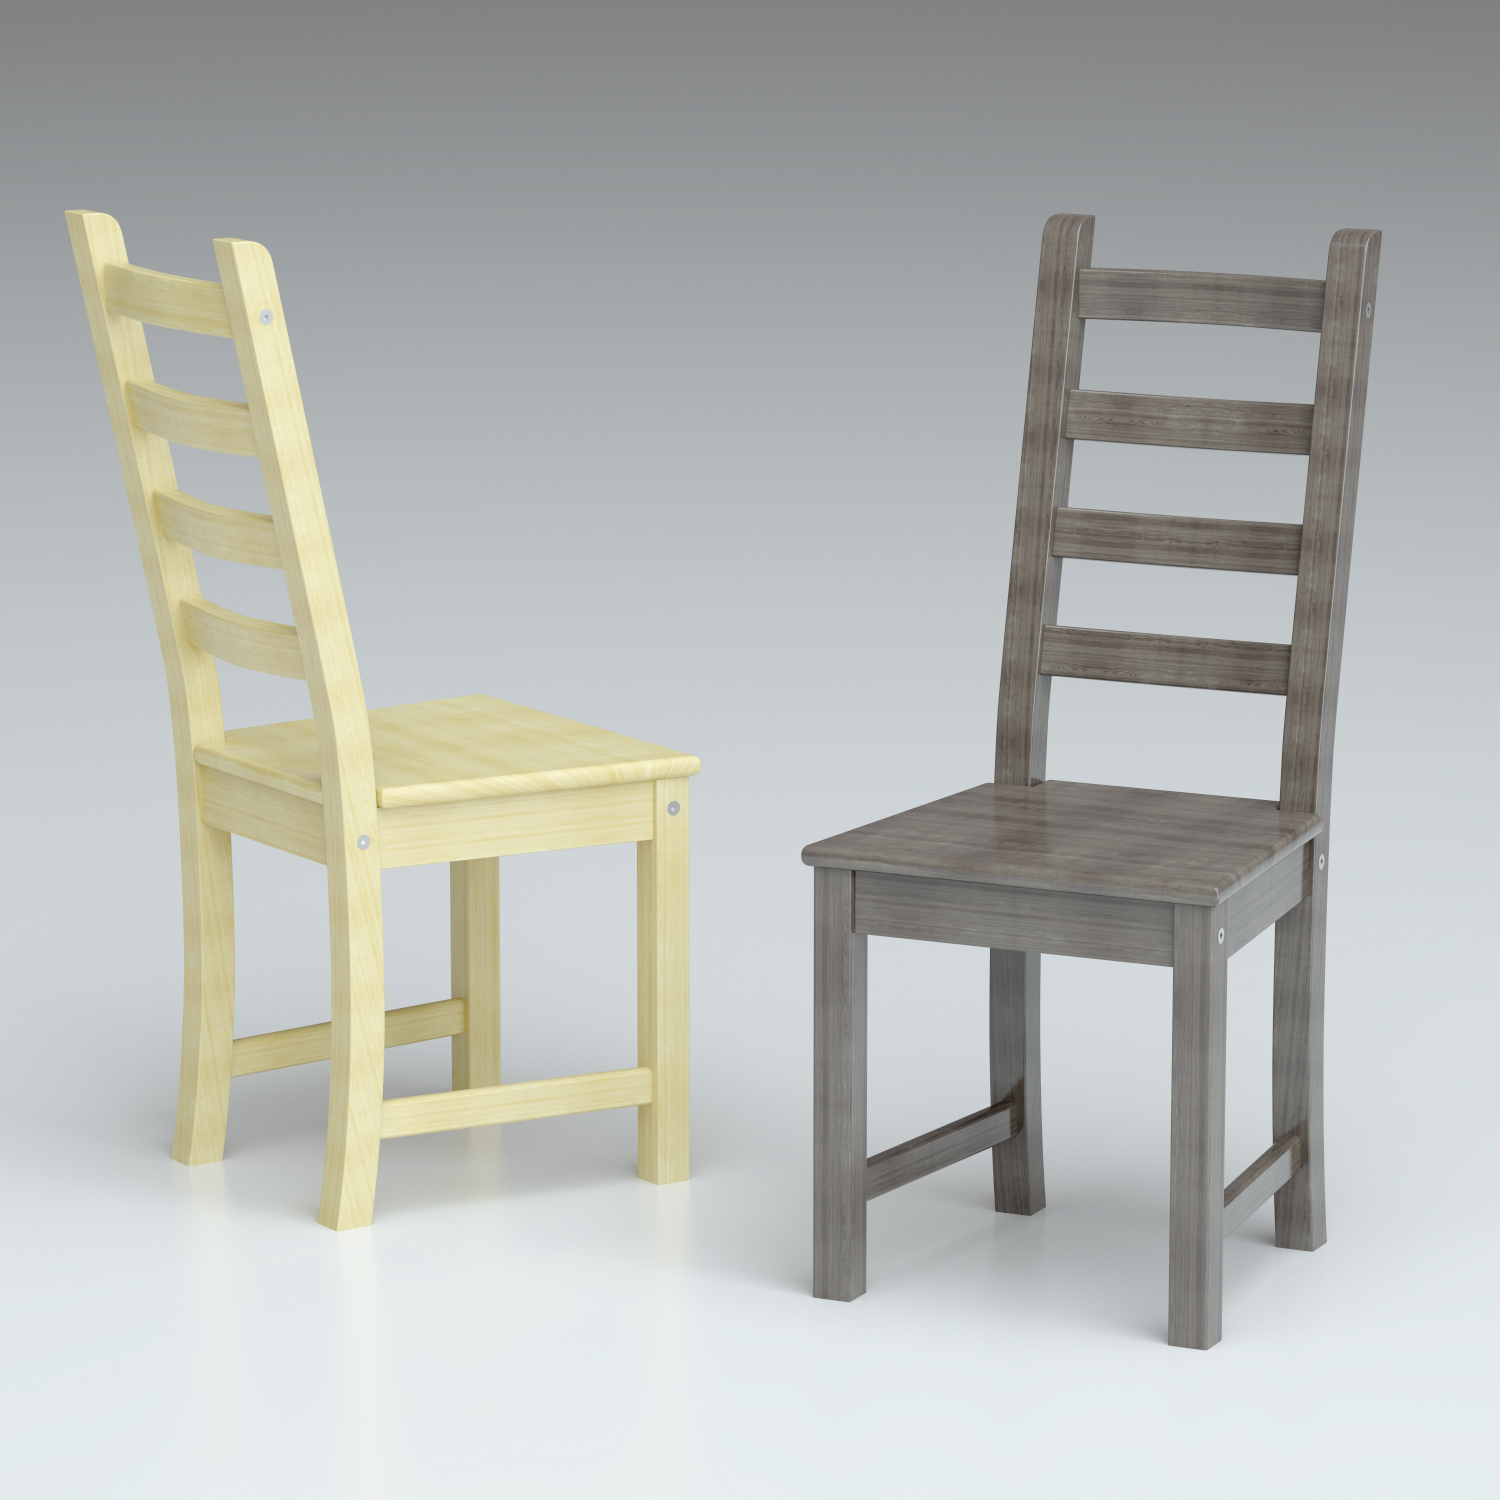 3d Realsize Kaustby Chair Ikea Model